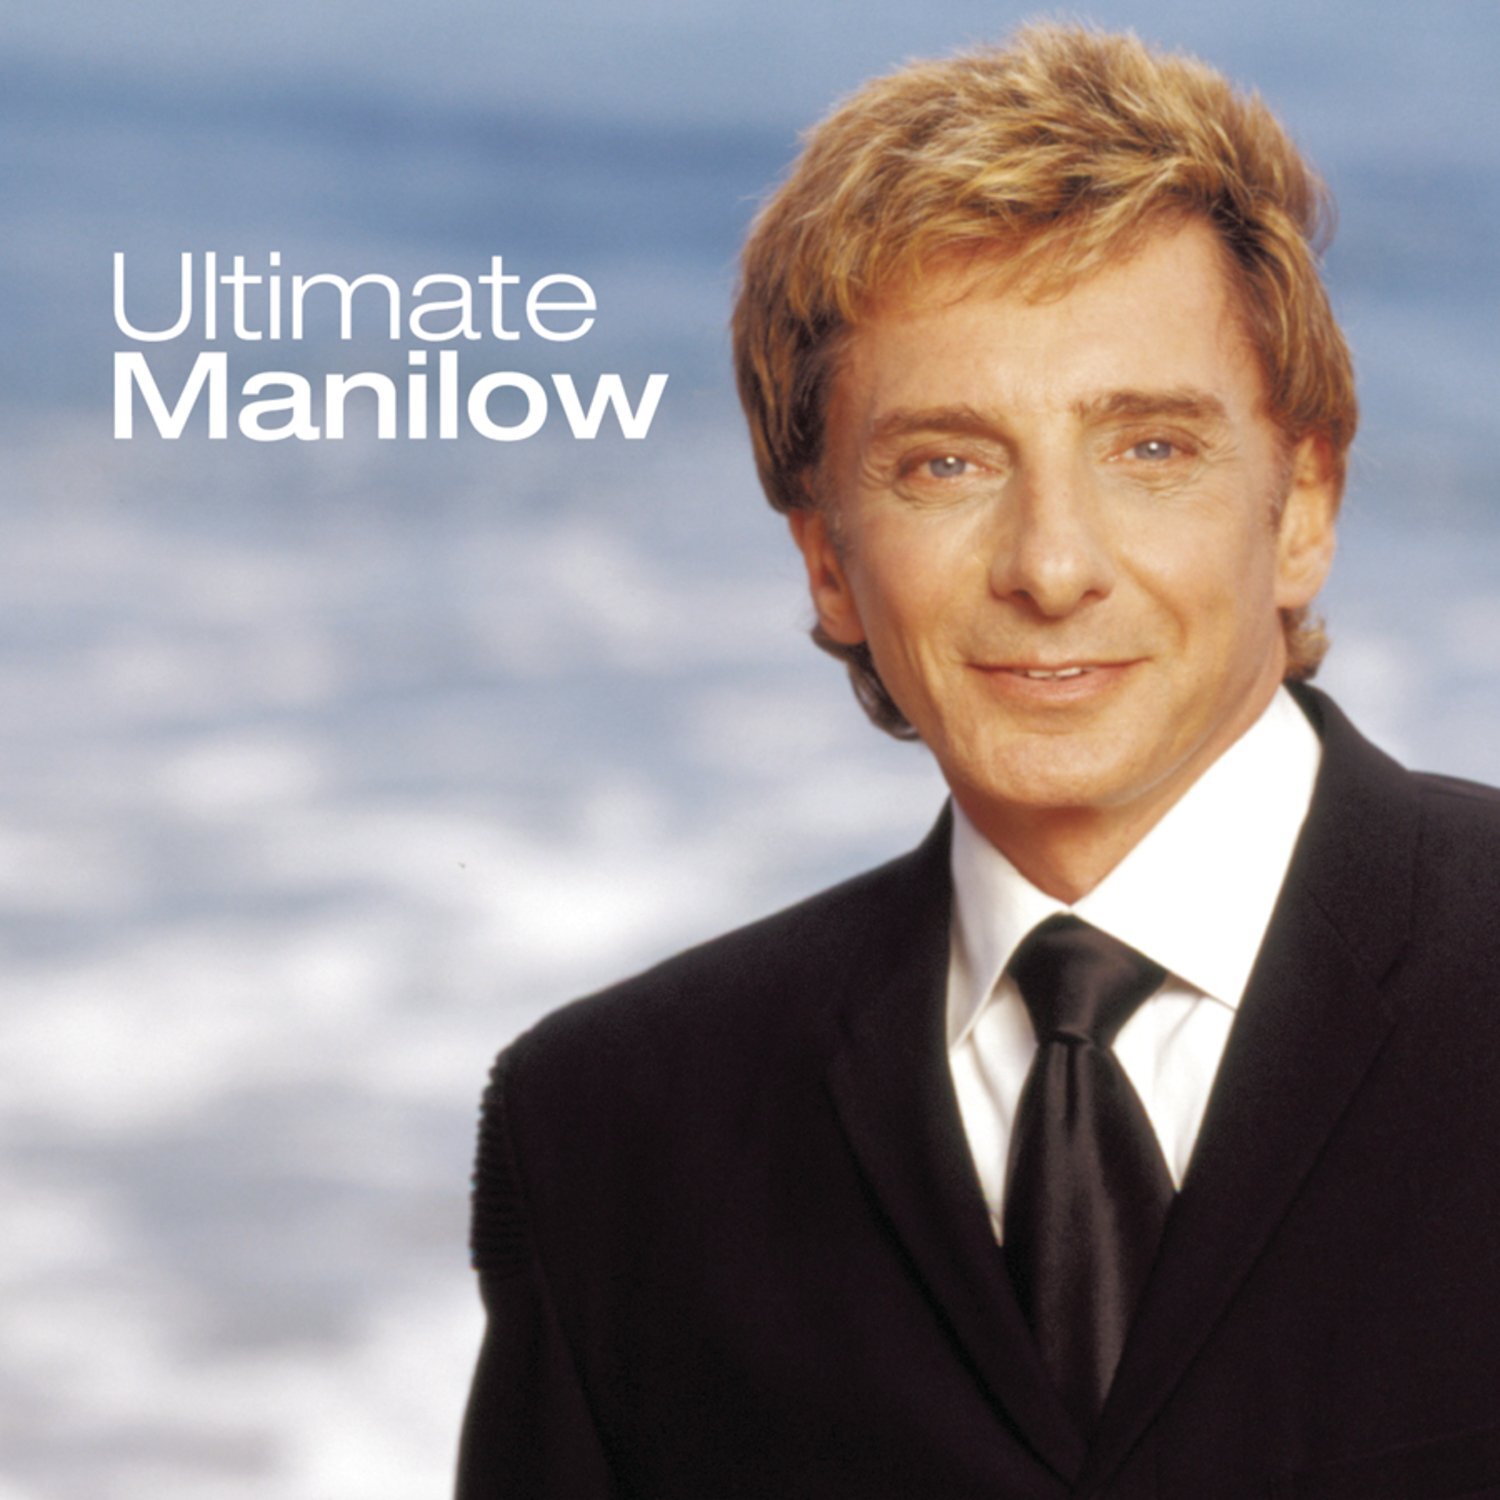 (43) Ultimate Manilow - Barry Manilow.jpg